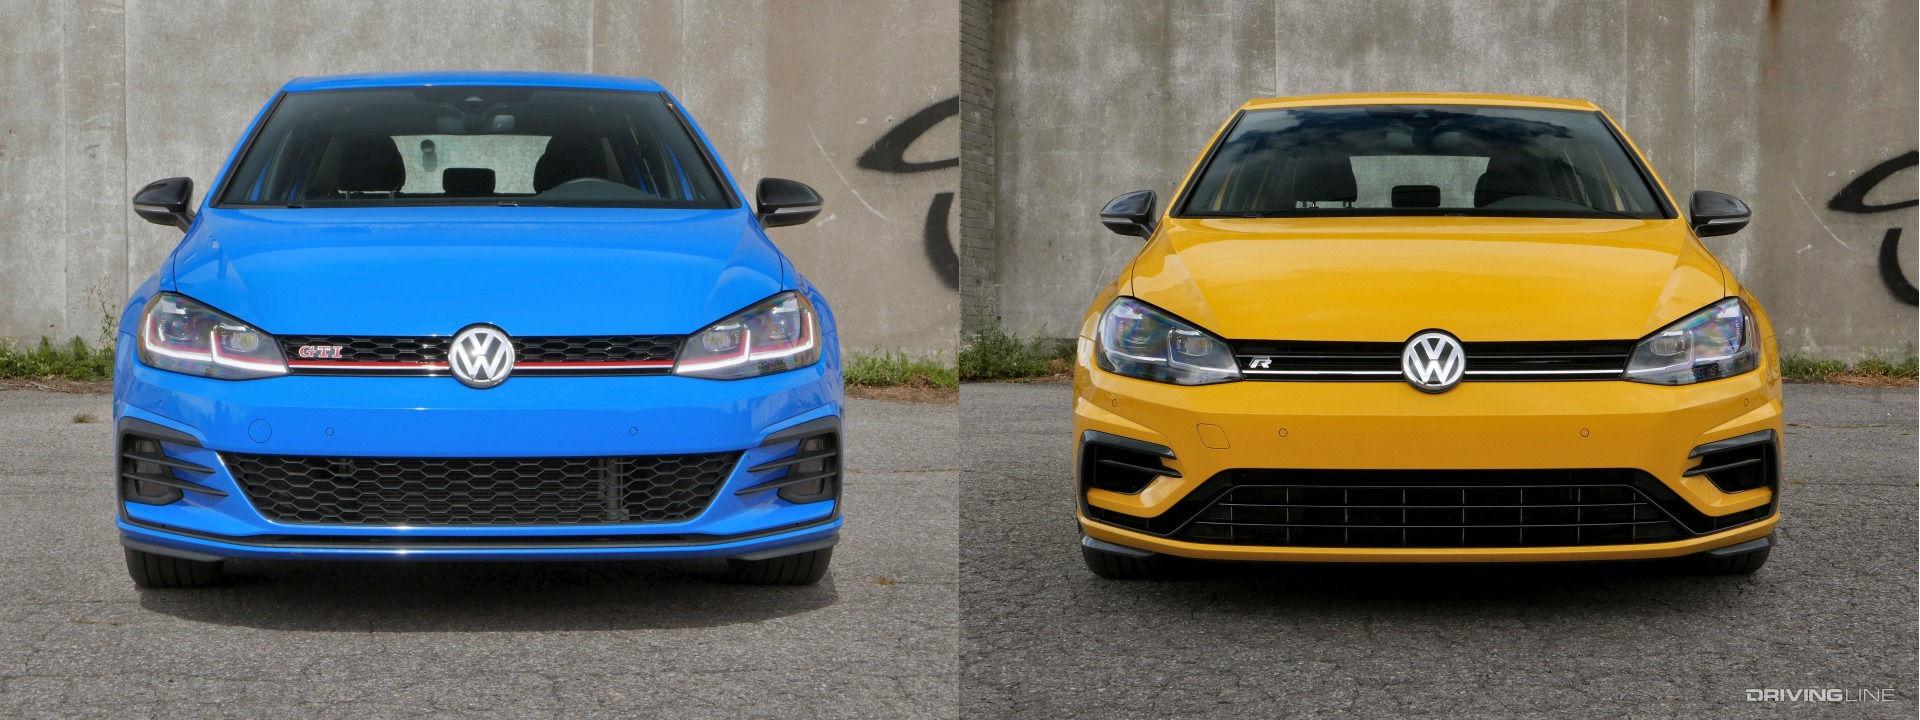 Difference Between Golf R Line And R Line Edition - Design Talk